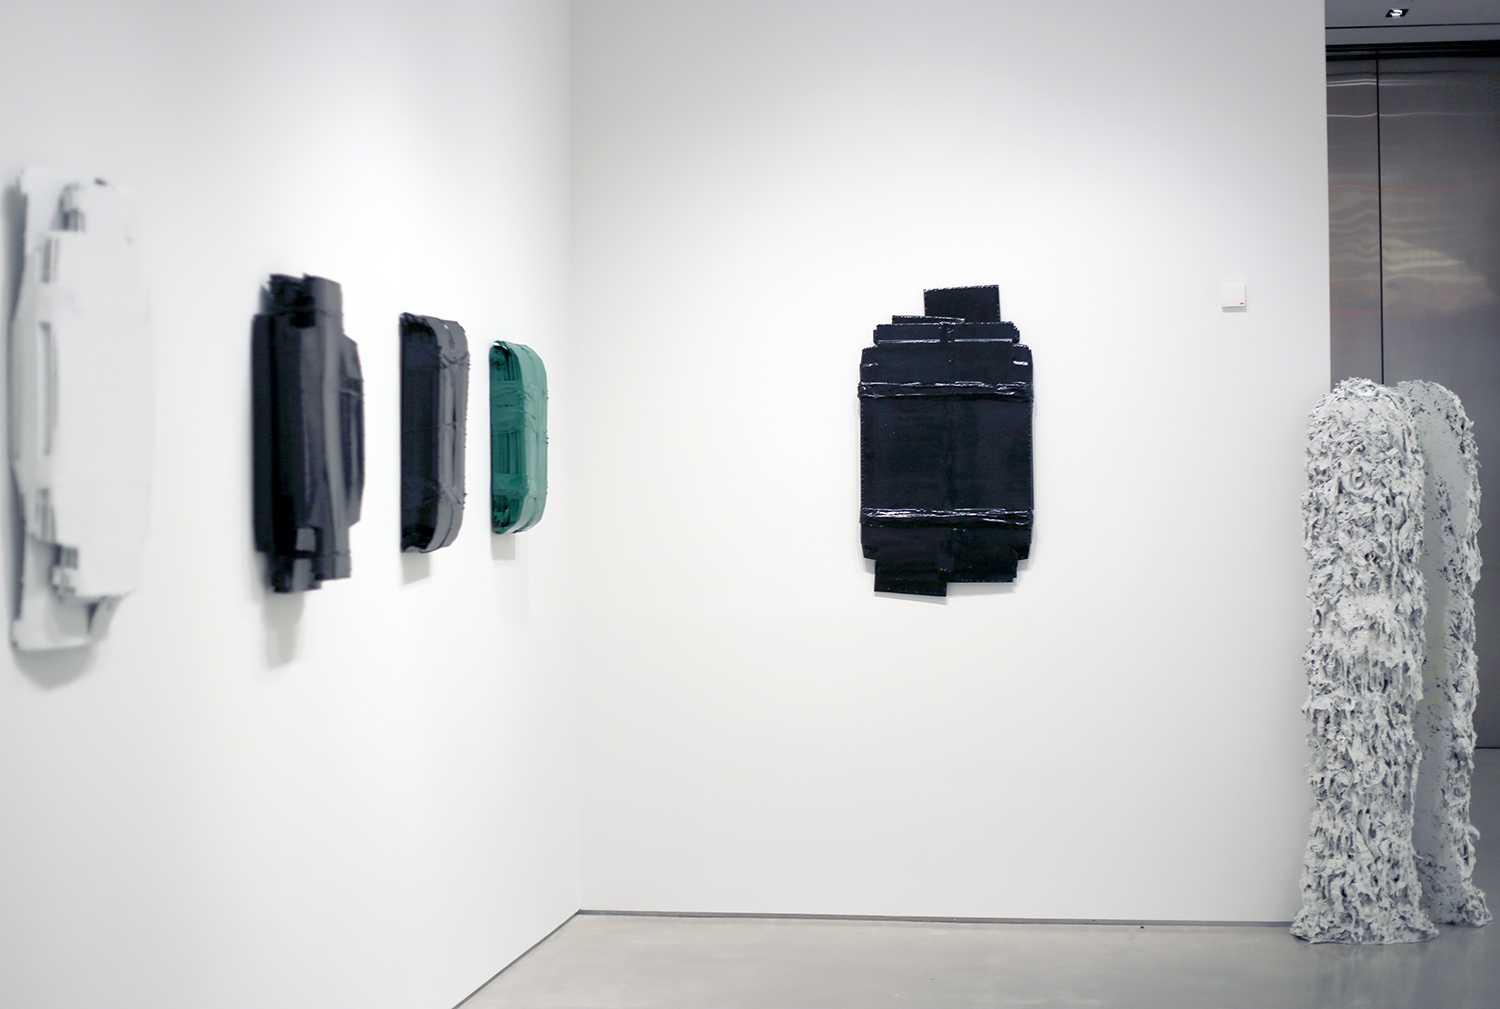 Helmut Lang - Exhibitions - Sperone Westwater